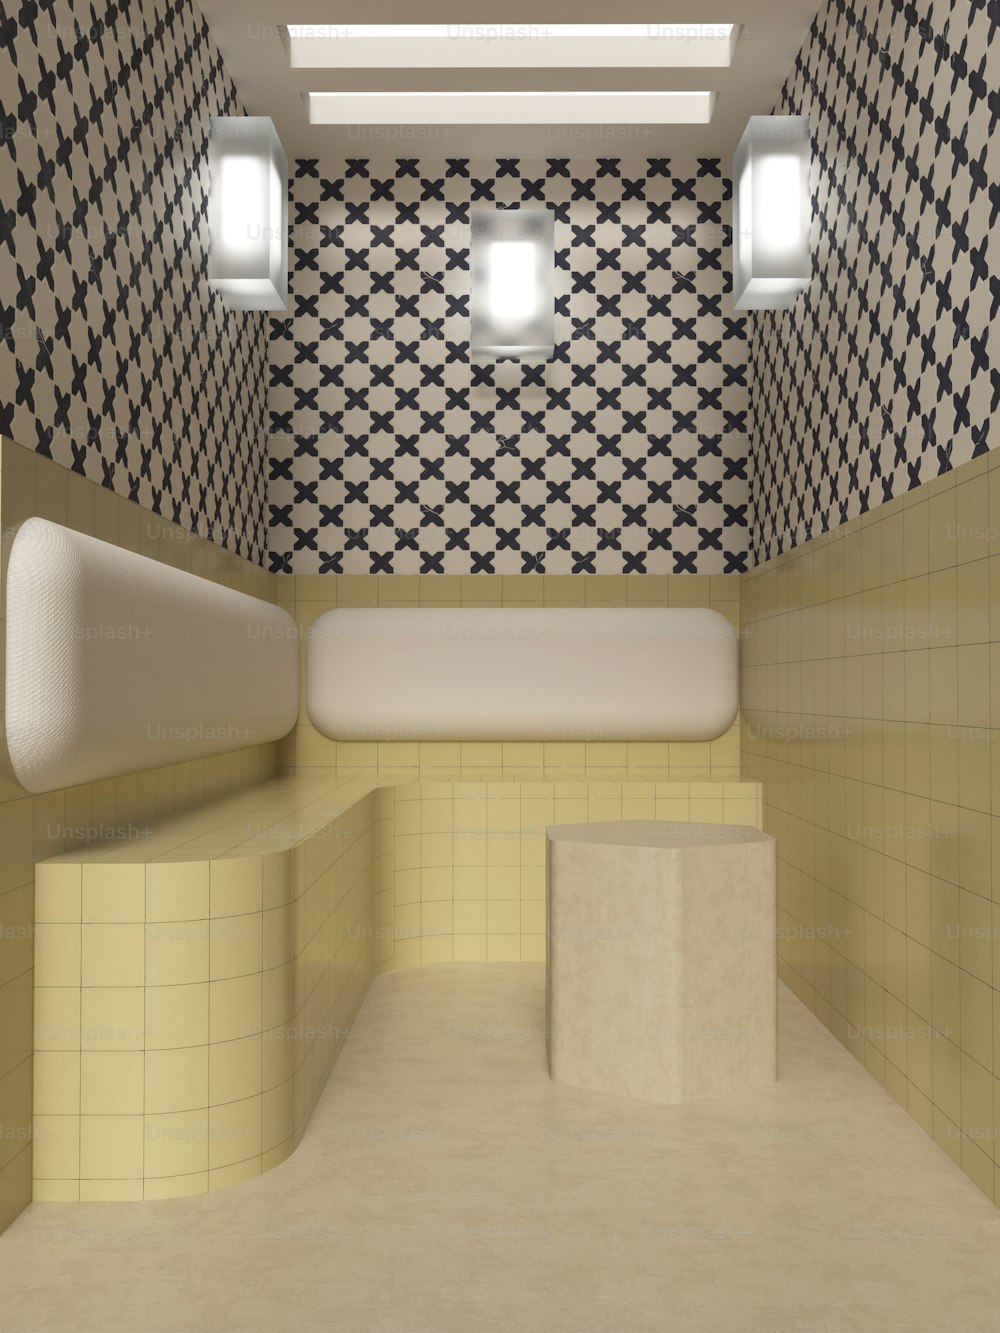 a bathroom with a checkered wall and tiled walls